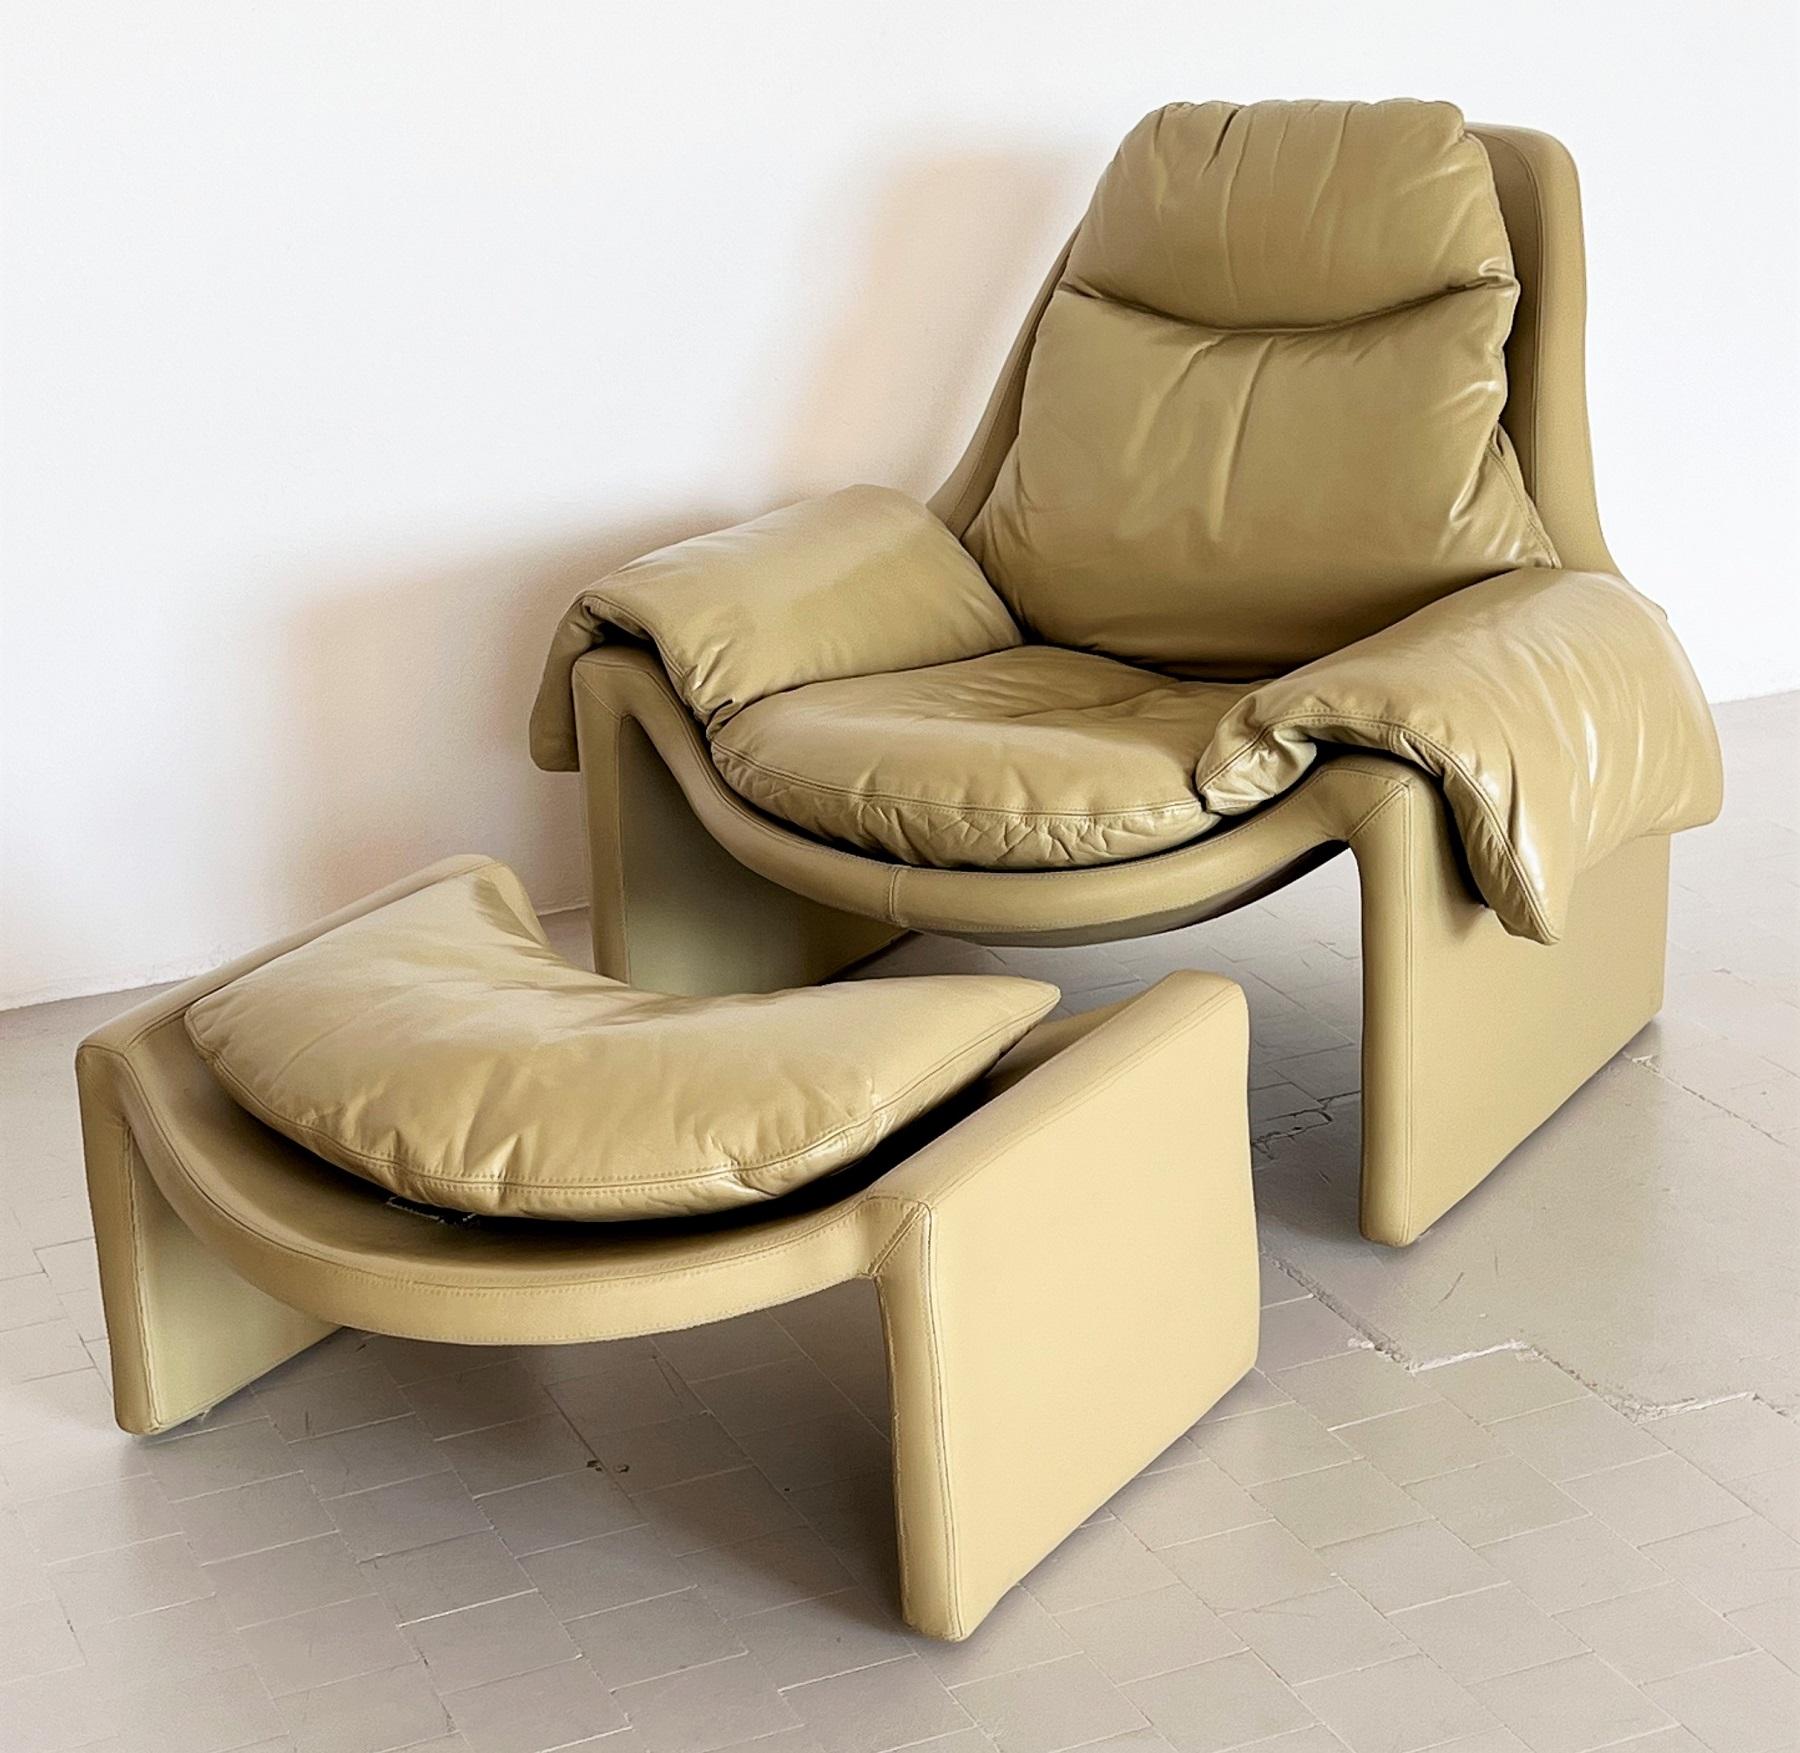 Late 20th Century Vittorio Introini P60 Set of Lounge Chair with Ottoman for Saporiti, 1960s For Sale